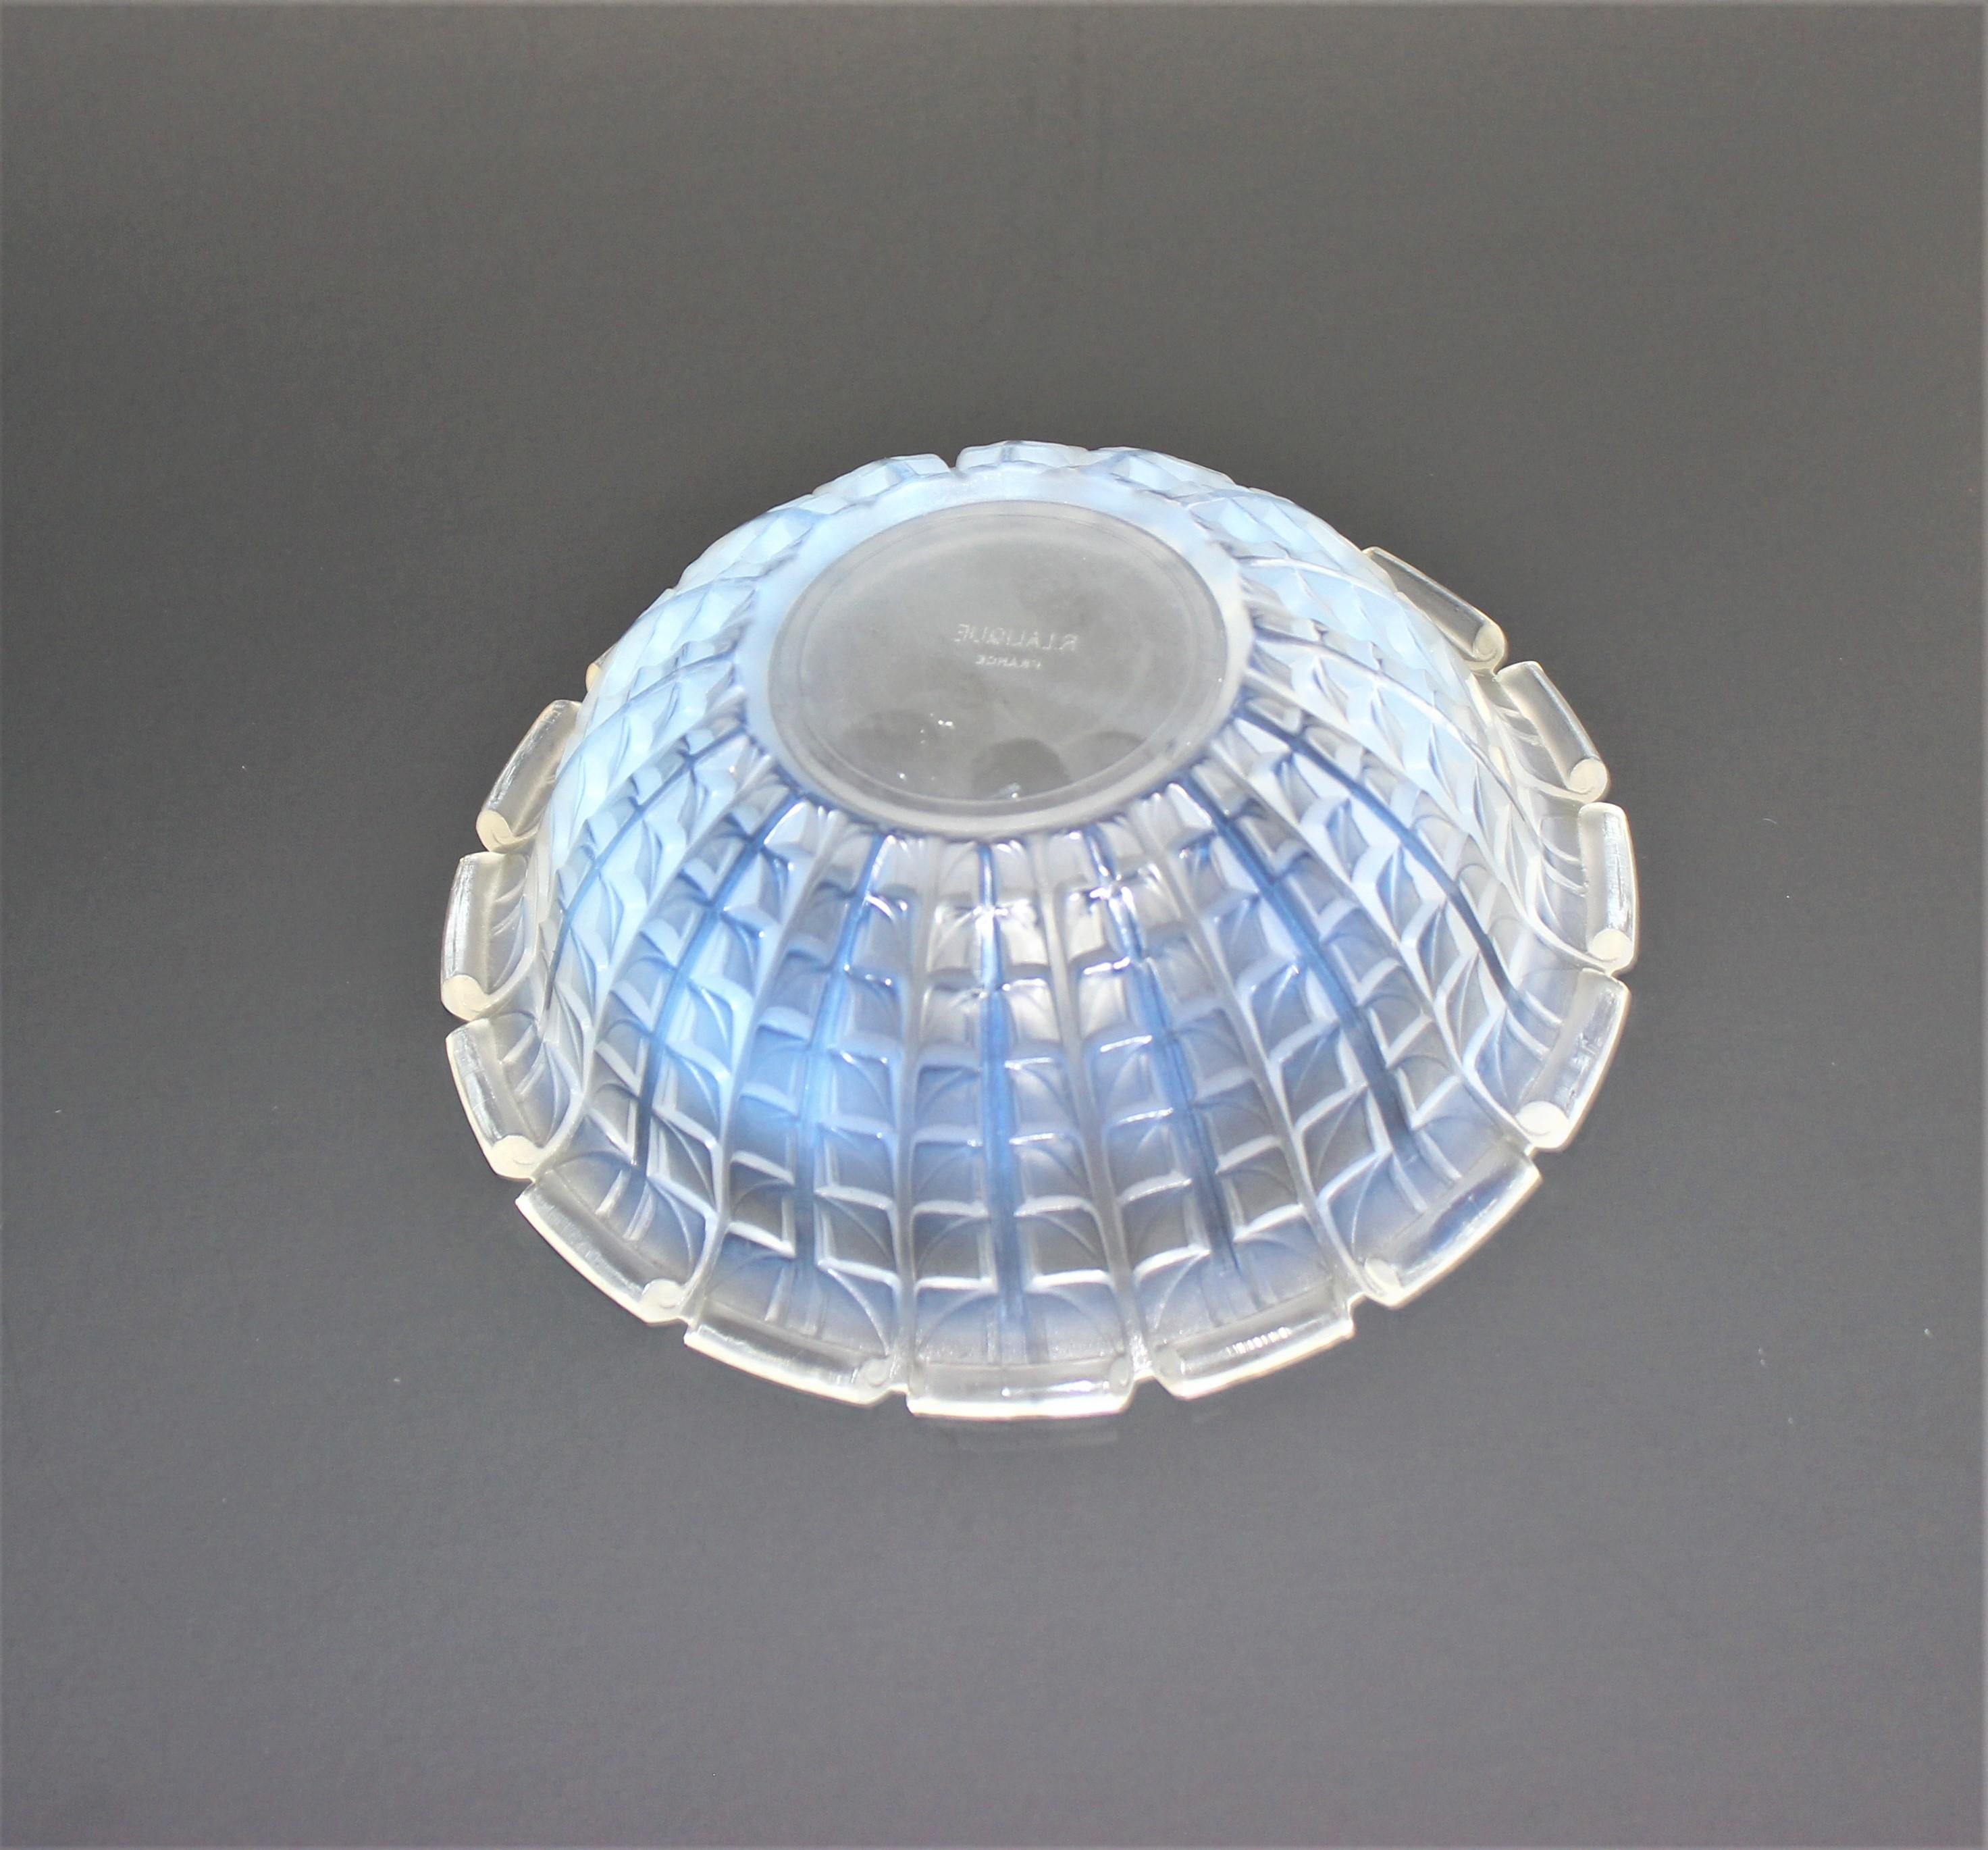 R. Lalique 1928 model acacia pattern opalescent crystal bowl from a Palm Beach estate.

This is a very subtle opaline coloring, in daylight against white it appears slightly yellow tinged with a fleeting whisper of light blue, but on a black